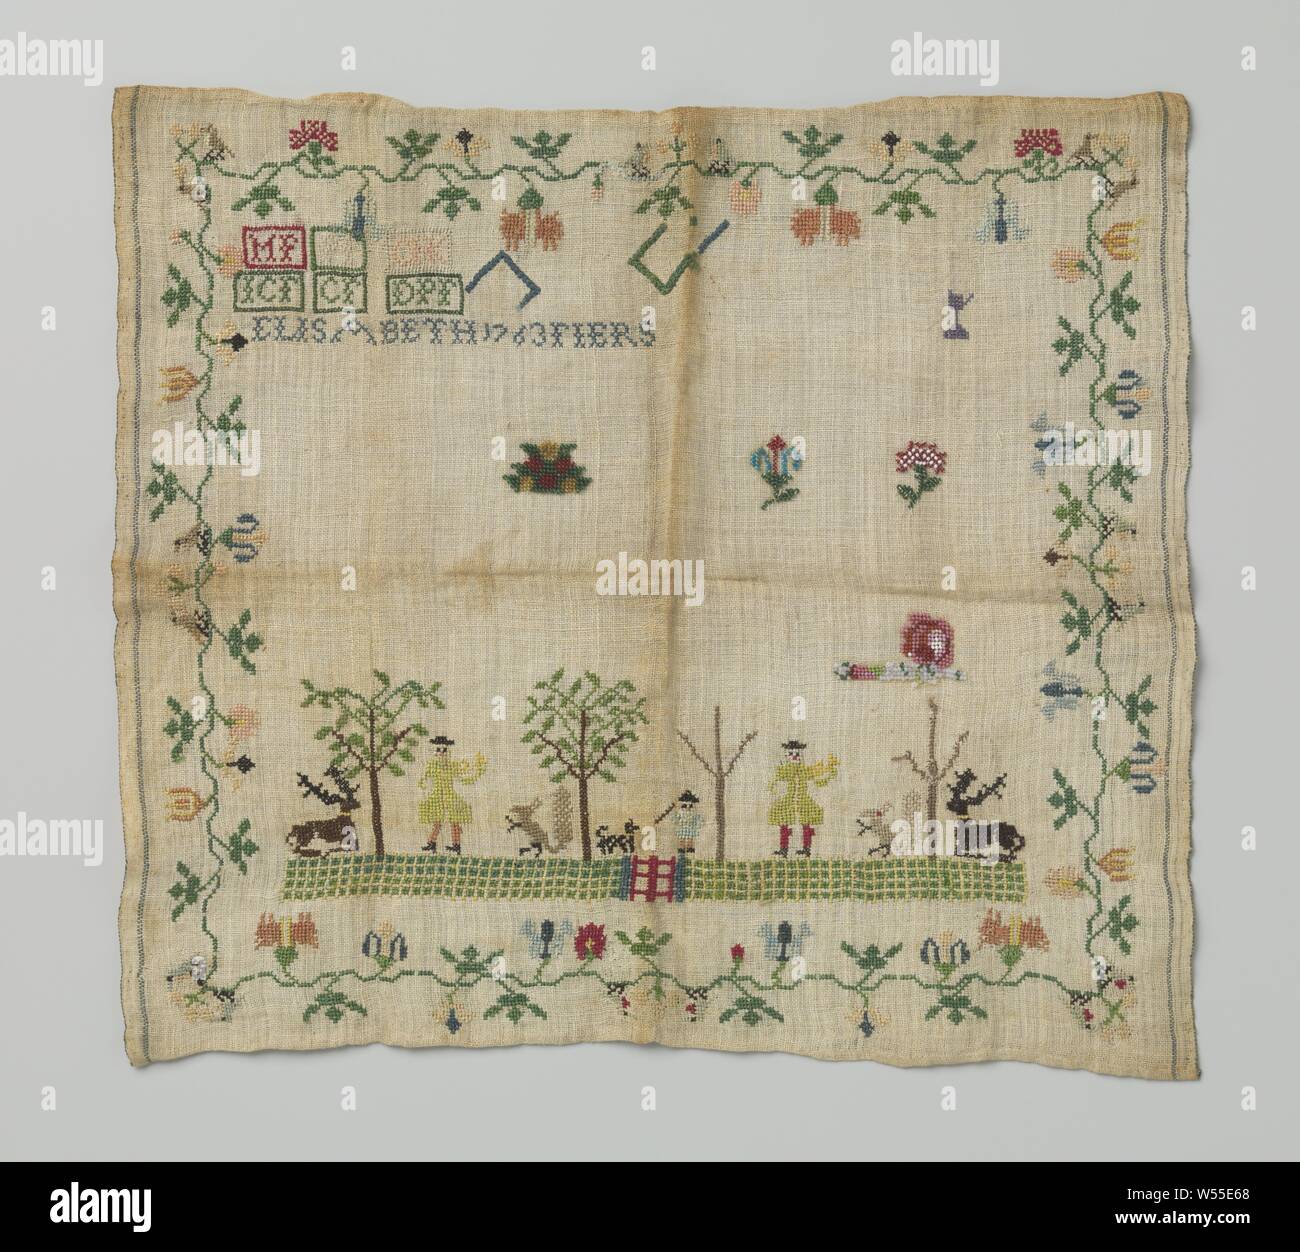 Brand patch made of linen with fox silk with scenes inside a flower border, Brand patch made of linen with fox silk with scenes inside a flower border. Dated 1763., mejuffrouw Fiers, Netherlands, 1763, l 32 cm × w 37 cm Stock Photo